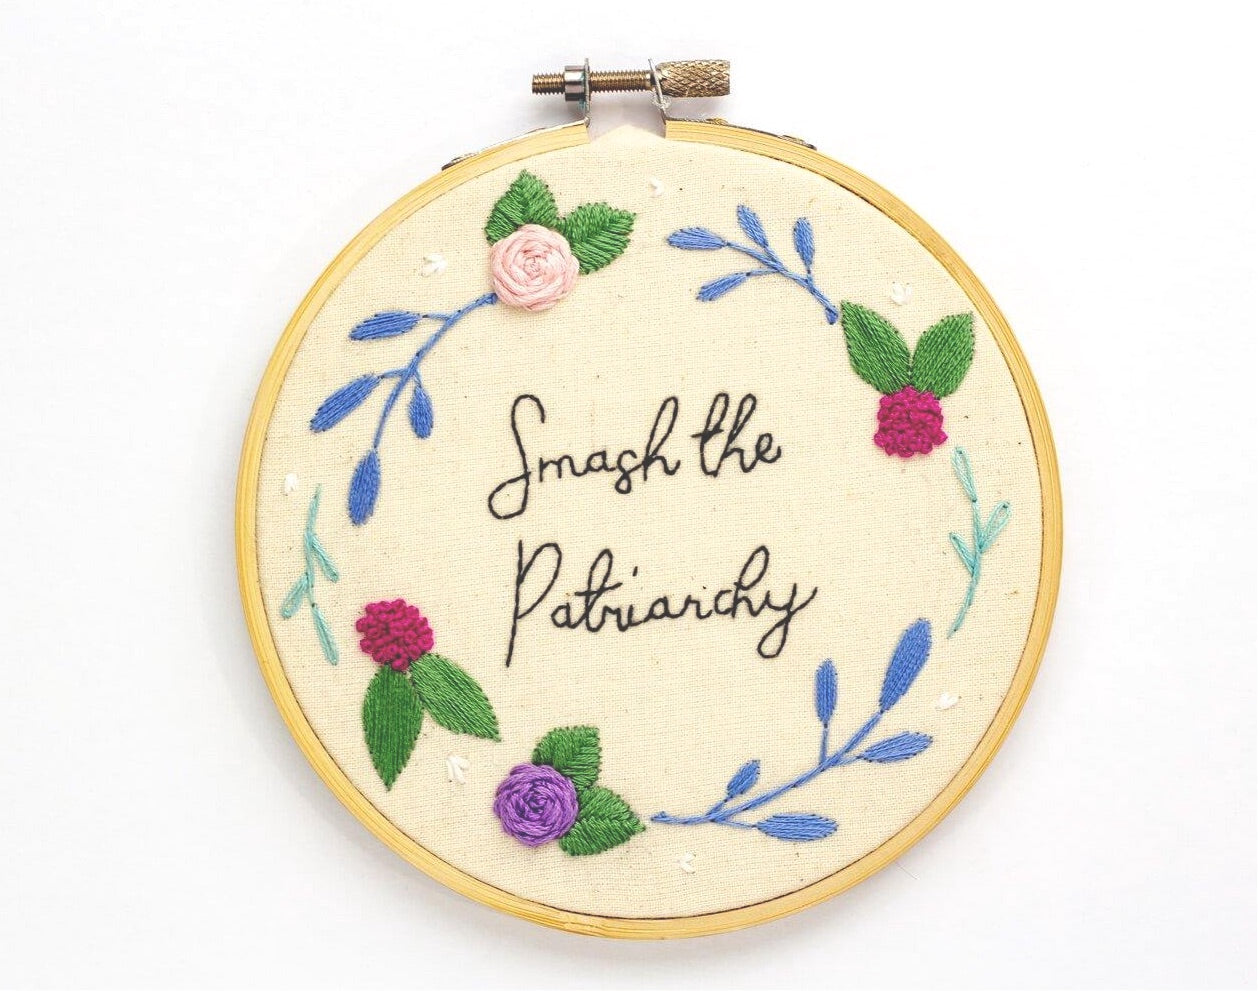 Smash the patriarchy front